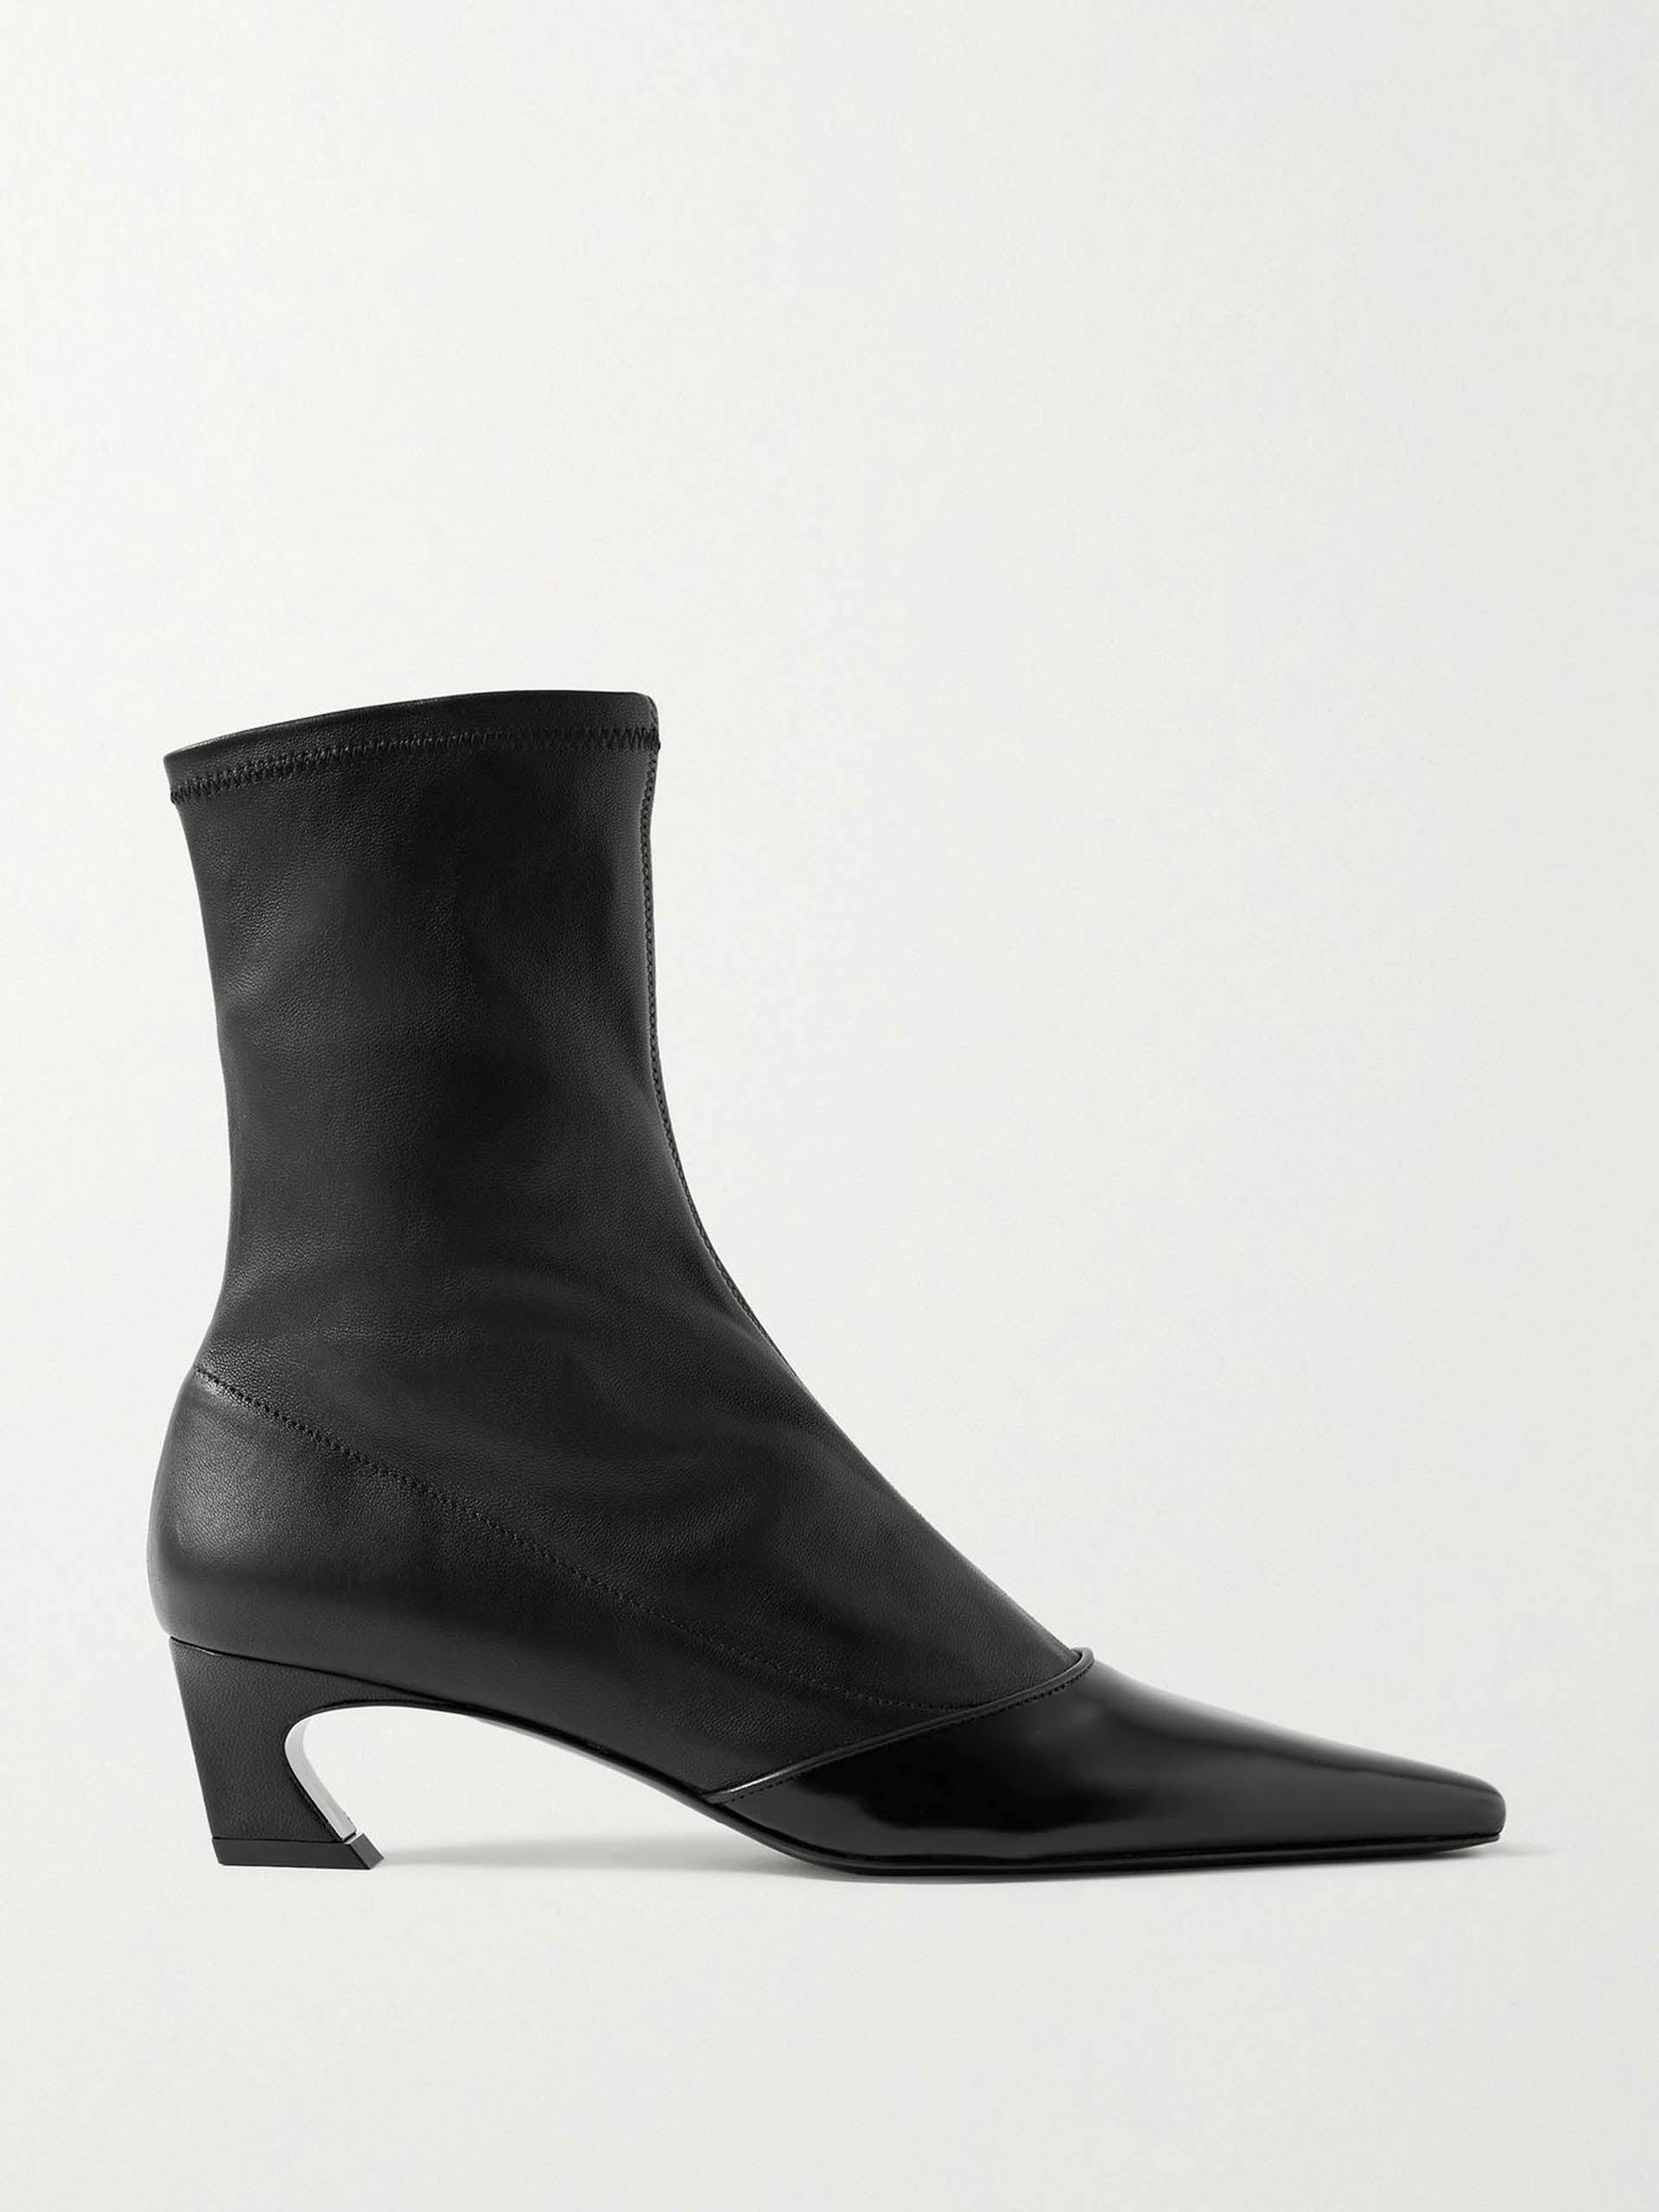 Black patent-trimmed leather ankle boots